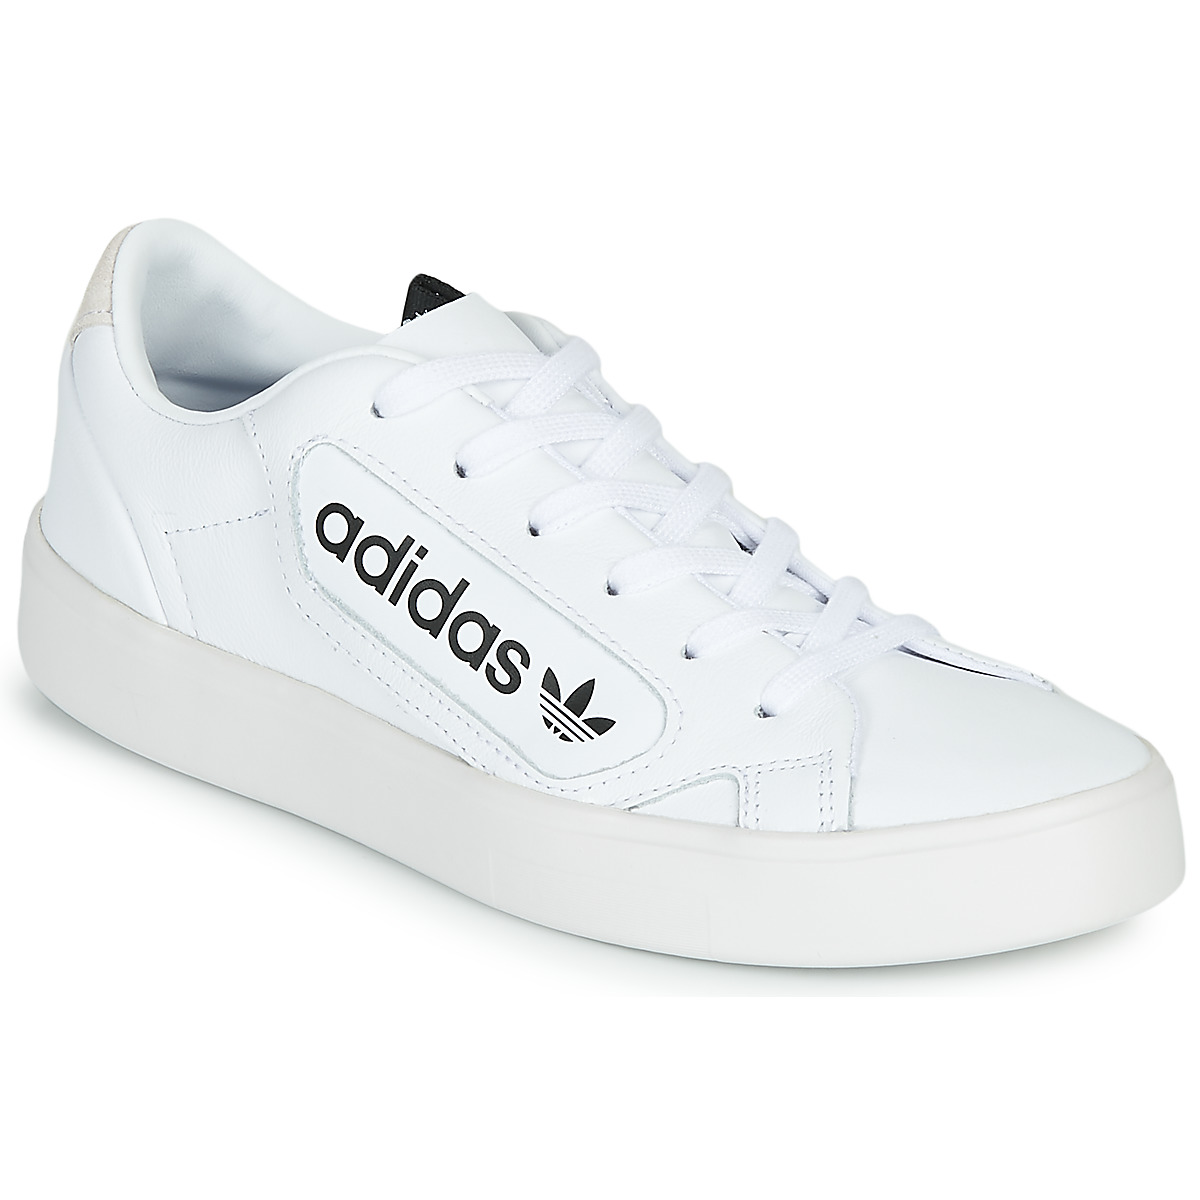 trainers Originals Shoes - top Spartoo | SLEEK delivery adidas UK ! W £ White Women Free Low - adidas